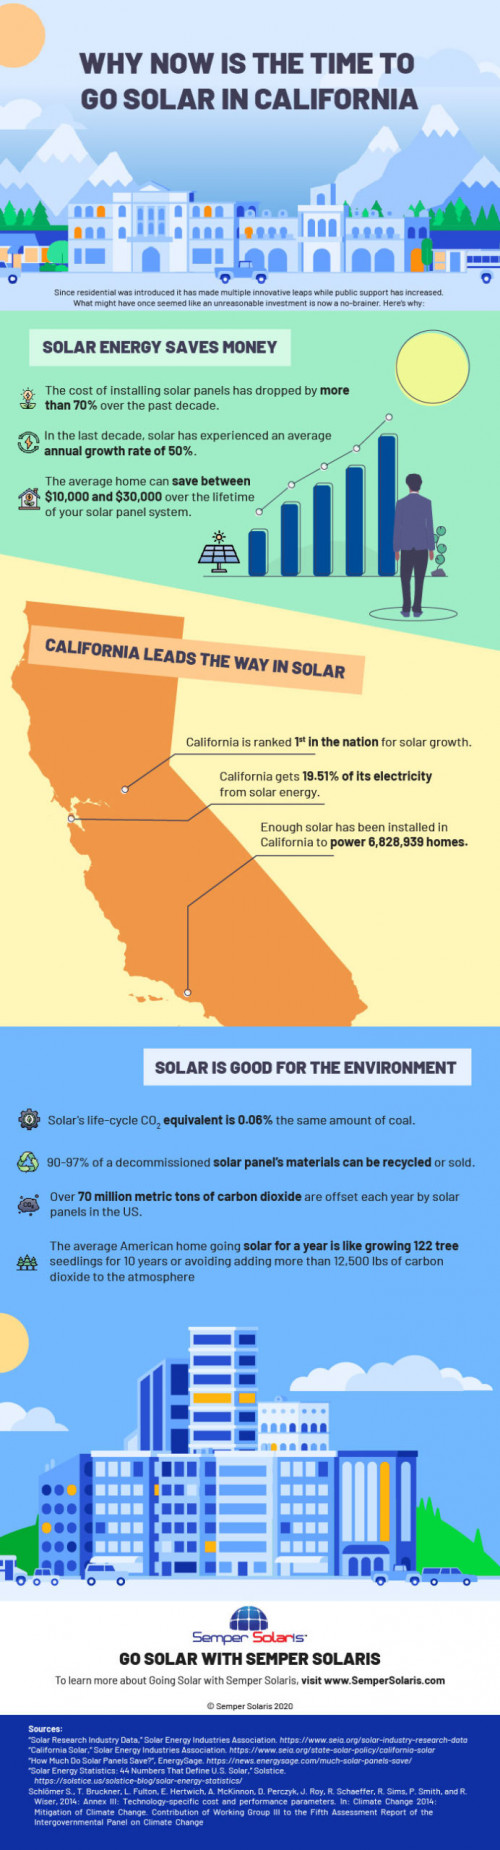 Why Now is The Time to Go Solar in California